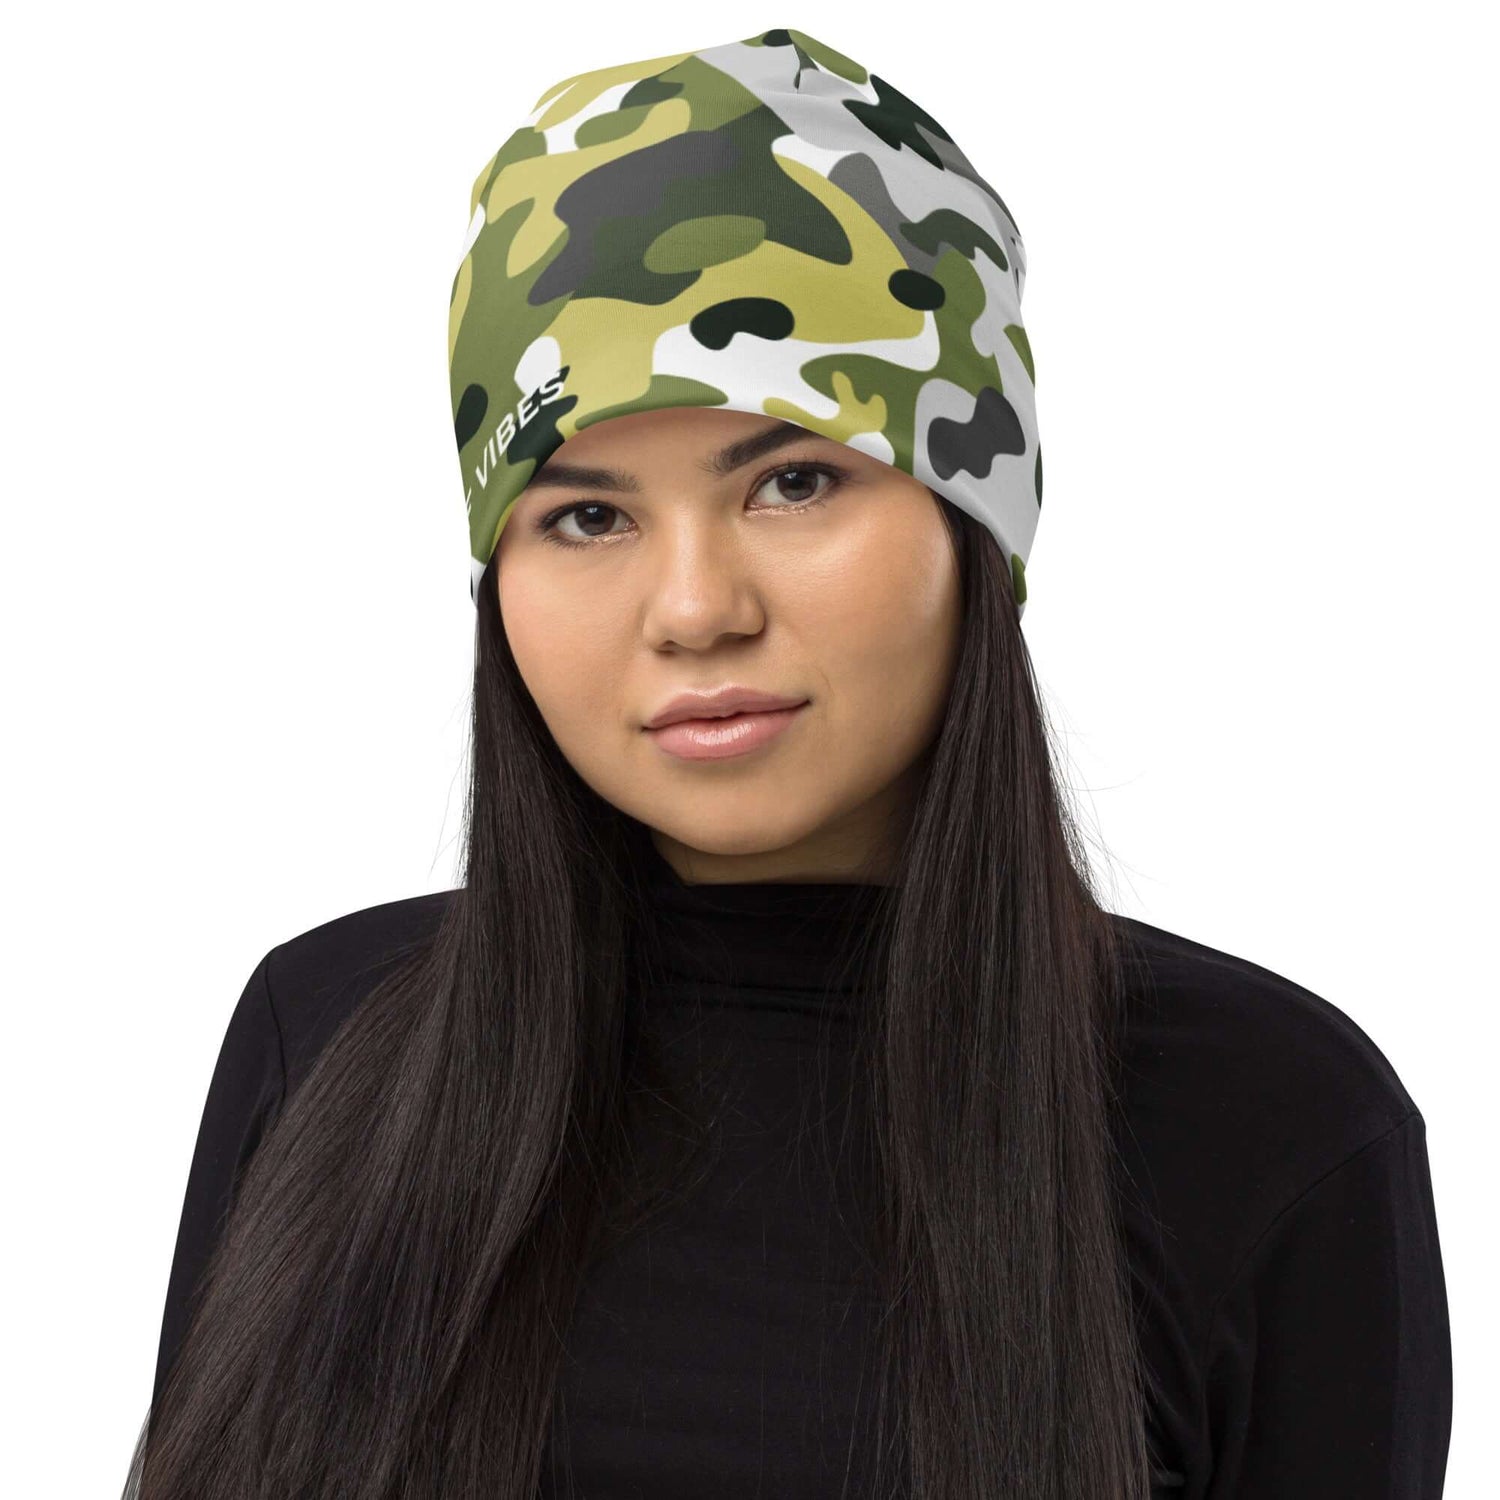 TIME OF VIBES TOV Beanie CAMOUFLAGE (Grün) - €29,50